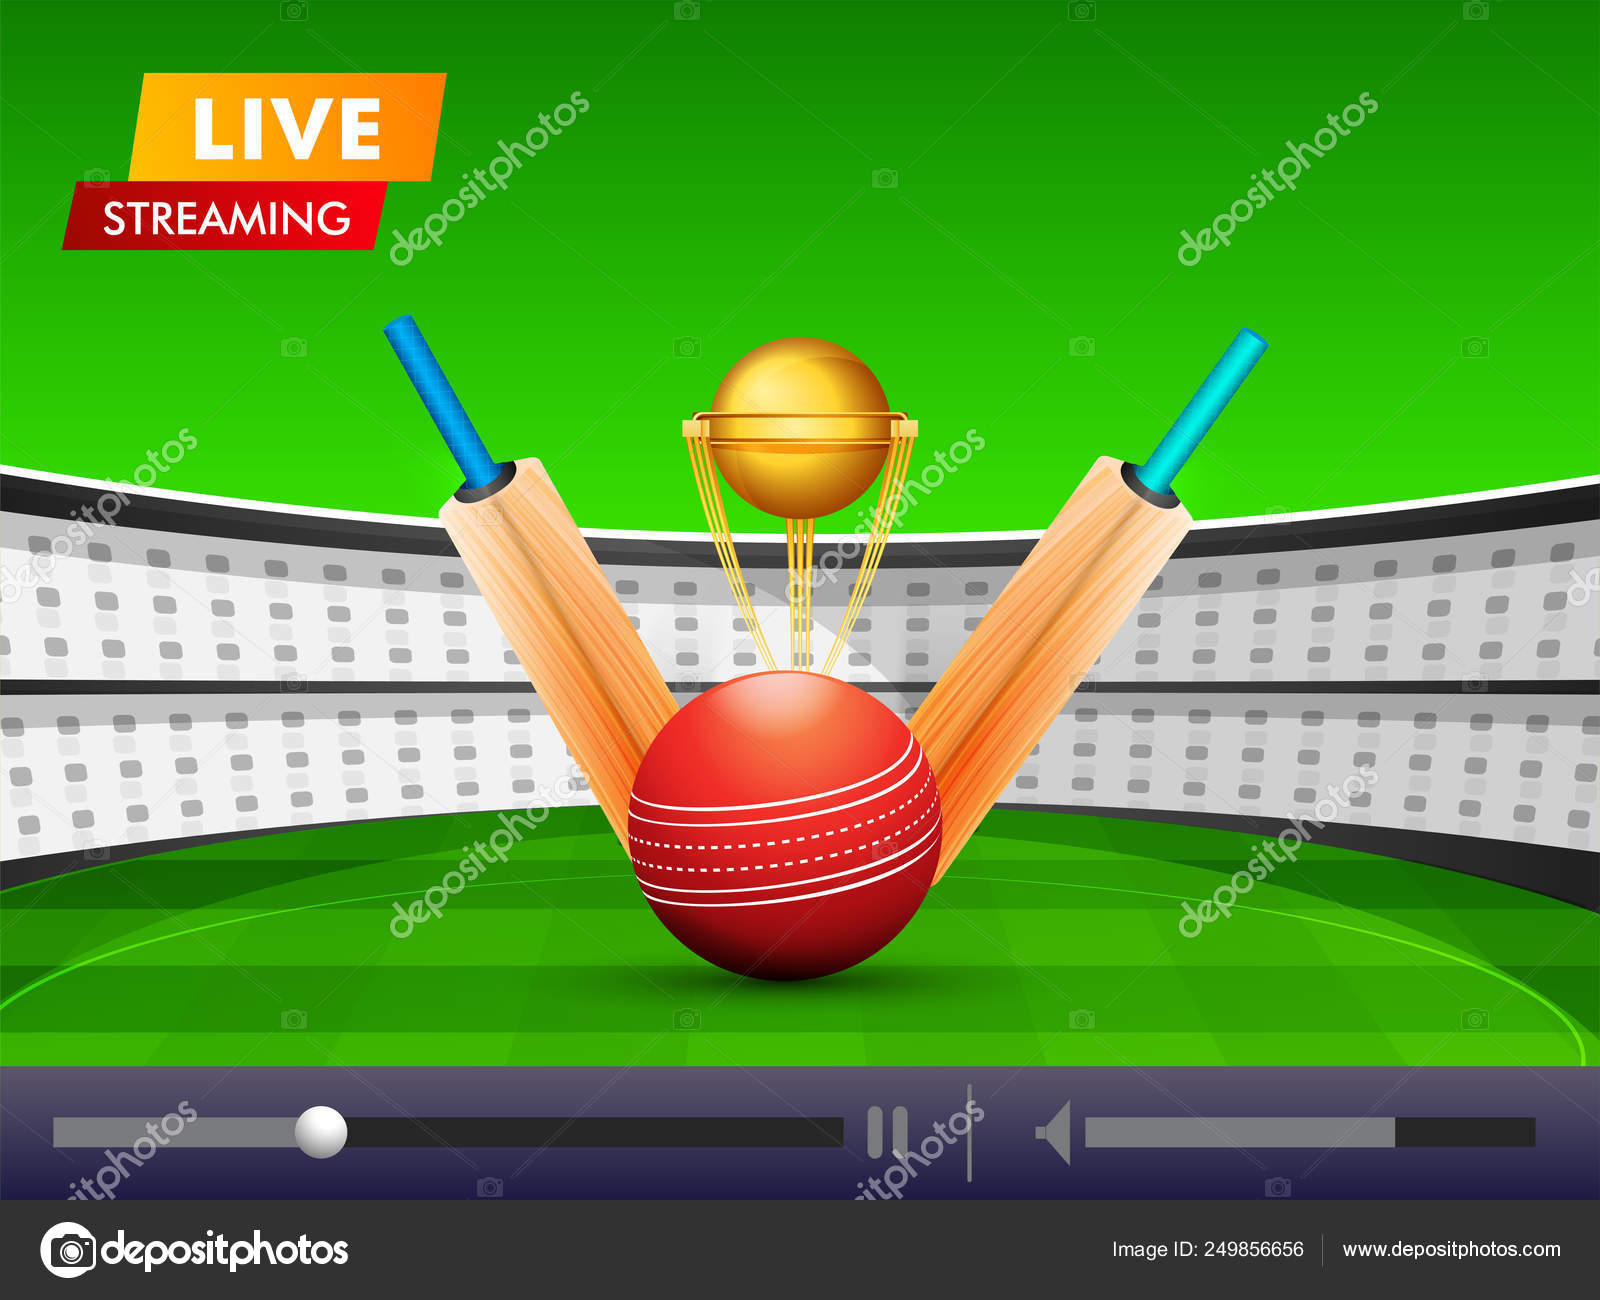 Live streaming video play window with illustration of bats, ball Stock Vector by ©alliesinteract 249856656